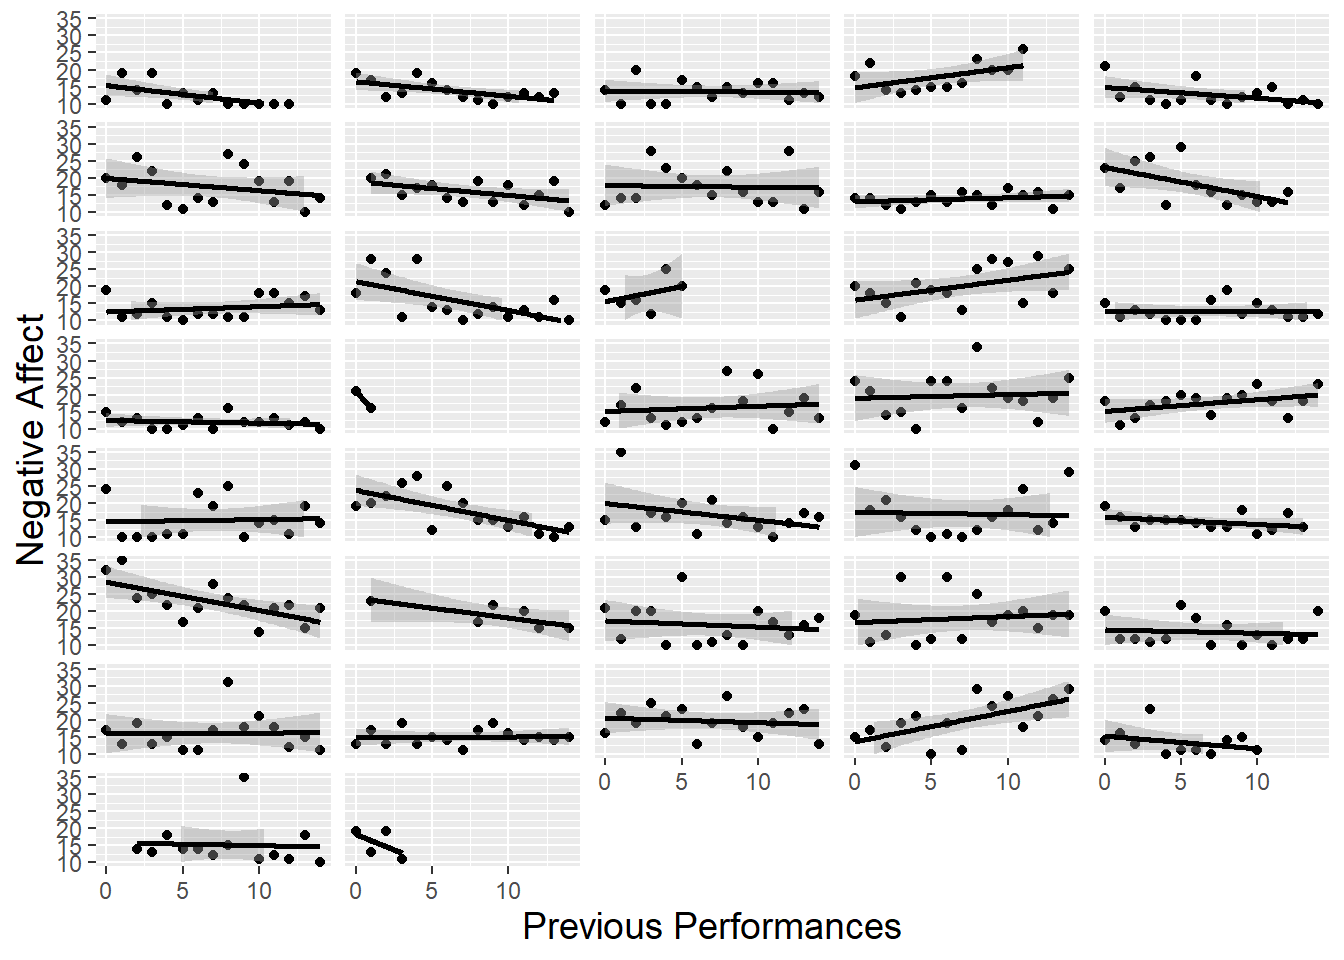 Lattice plot of previous performances vs. negative affect, with separate scatterplots with fitted lines by subject.